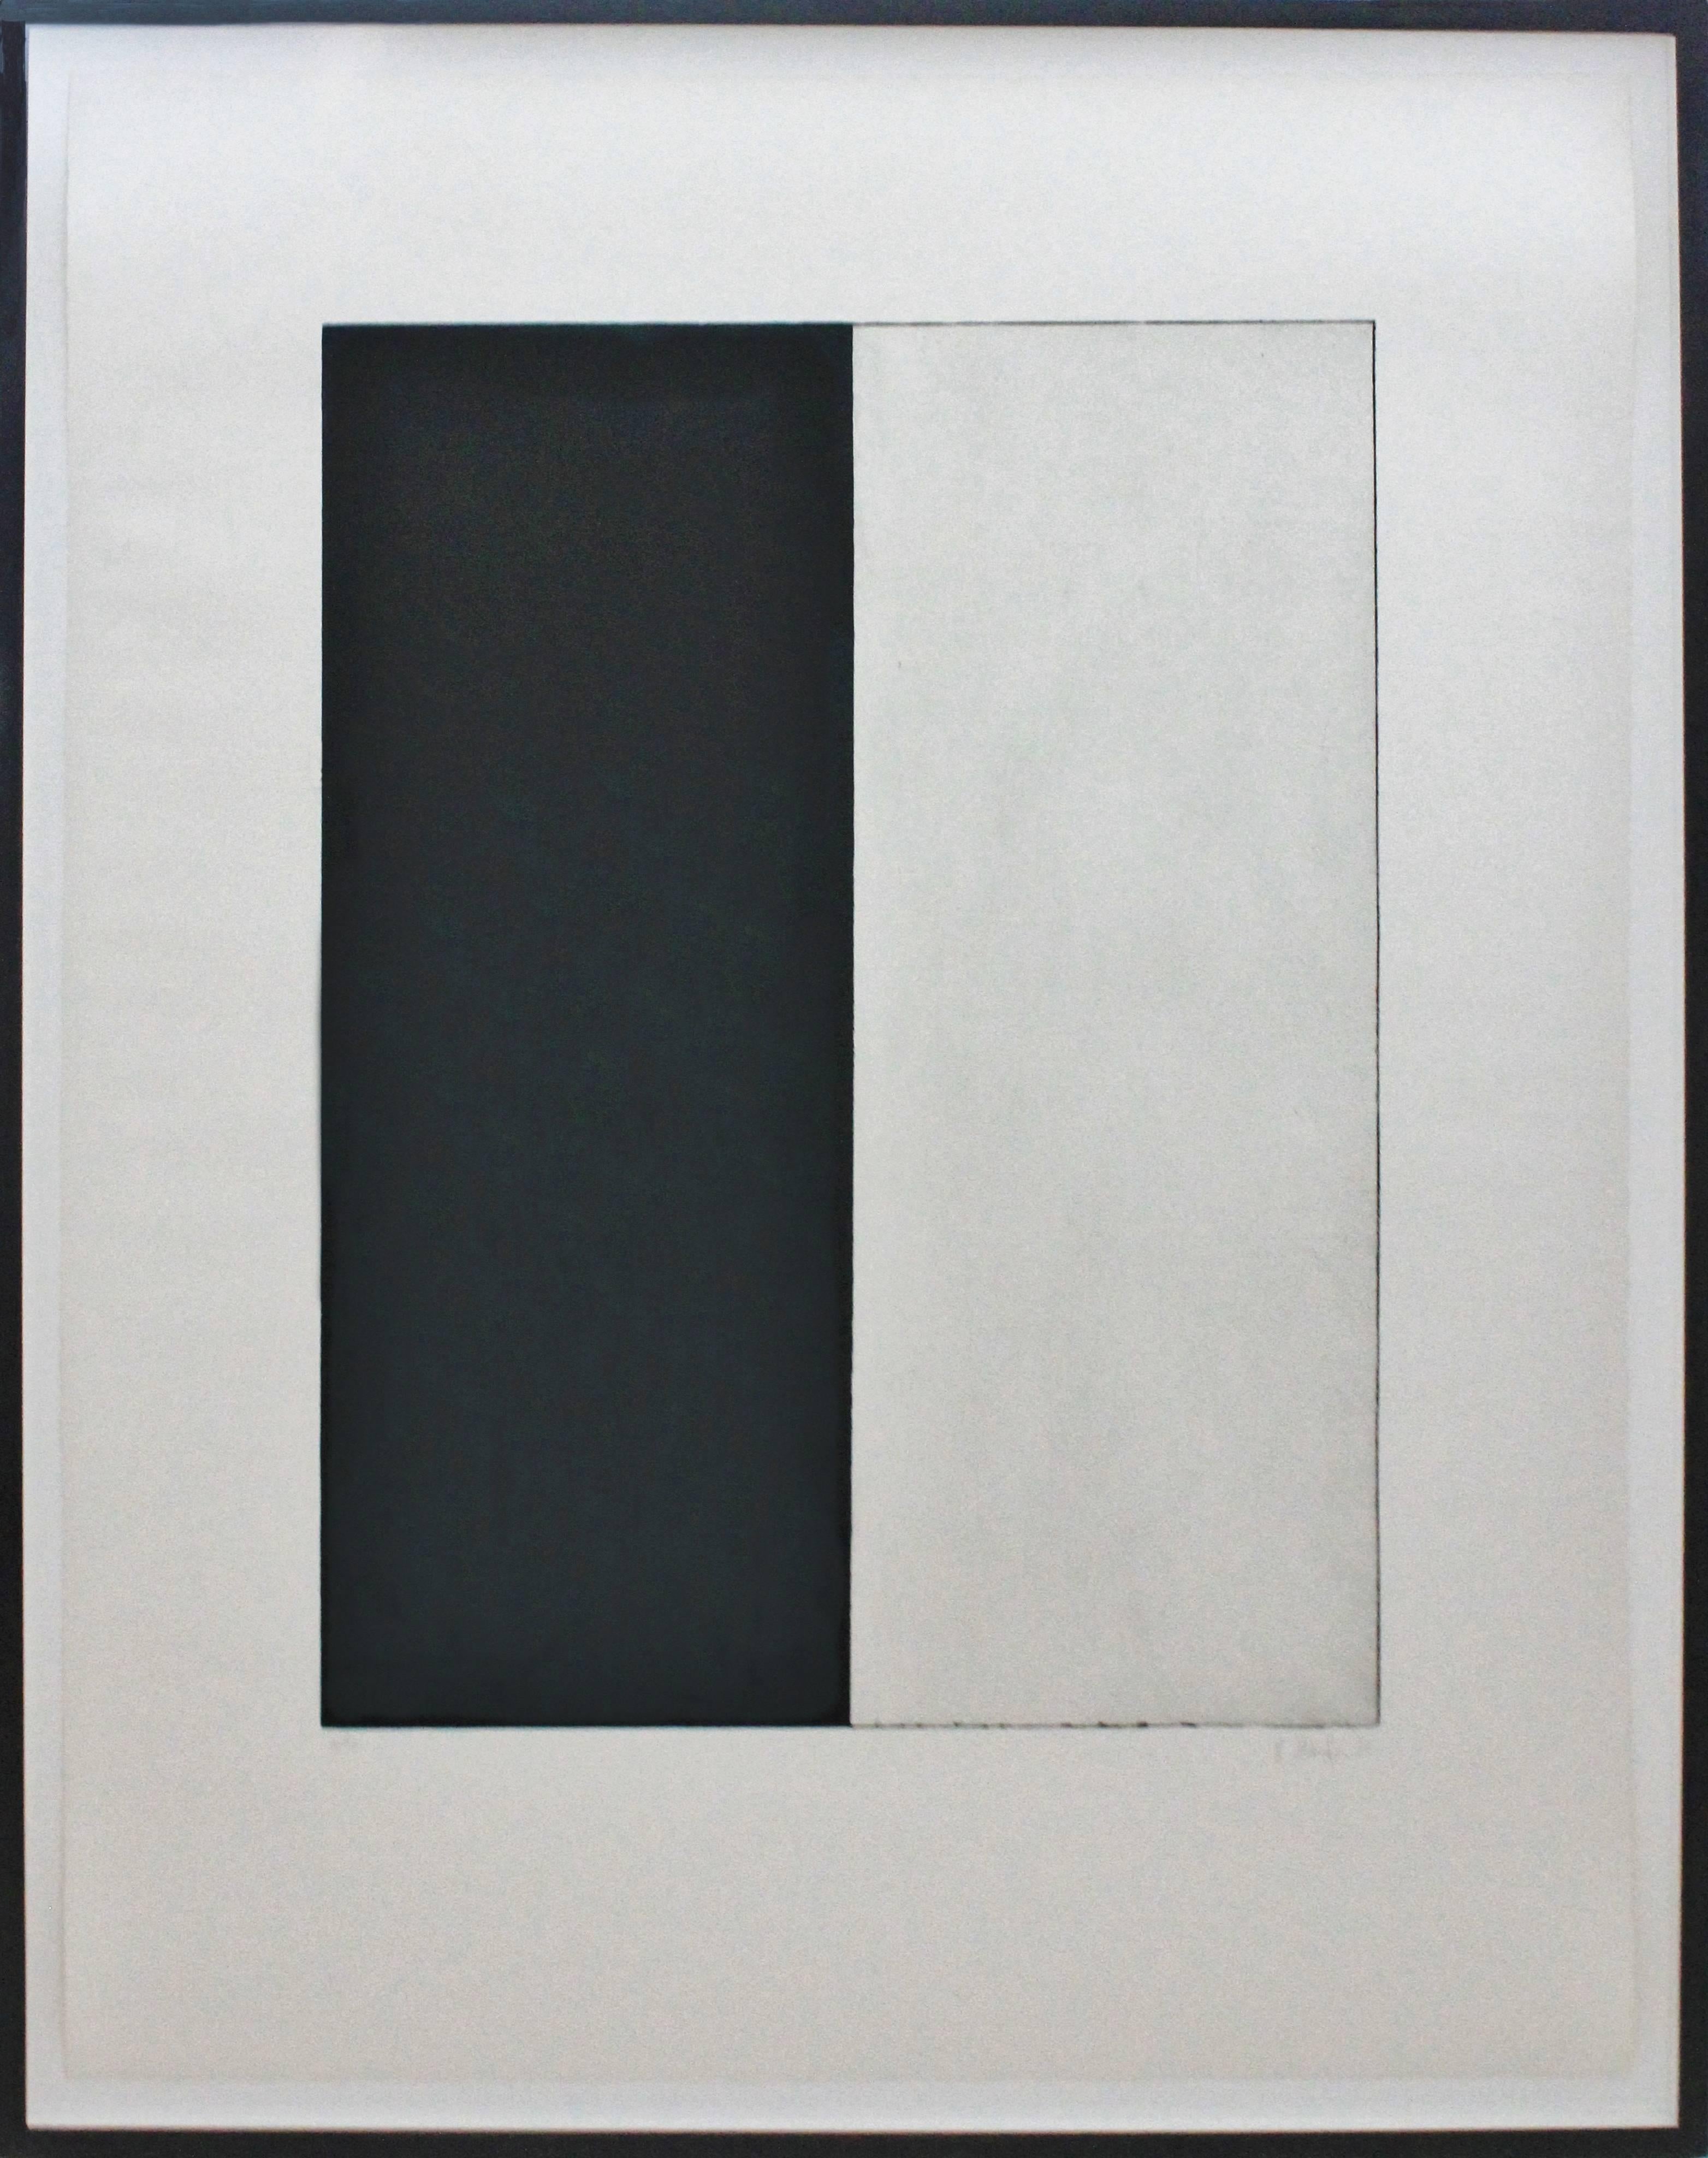 Untitled from a Portfolio of Five Plates - Print by Brice Marden